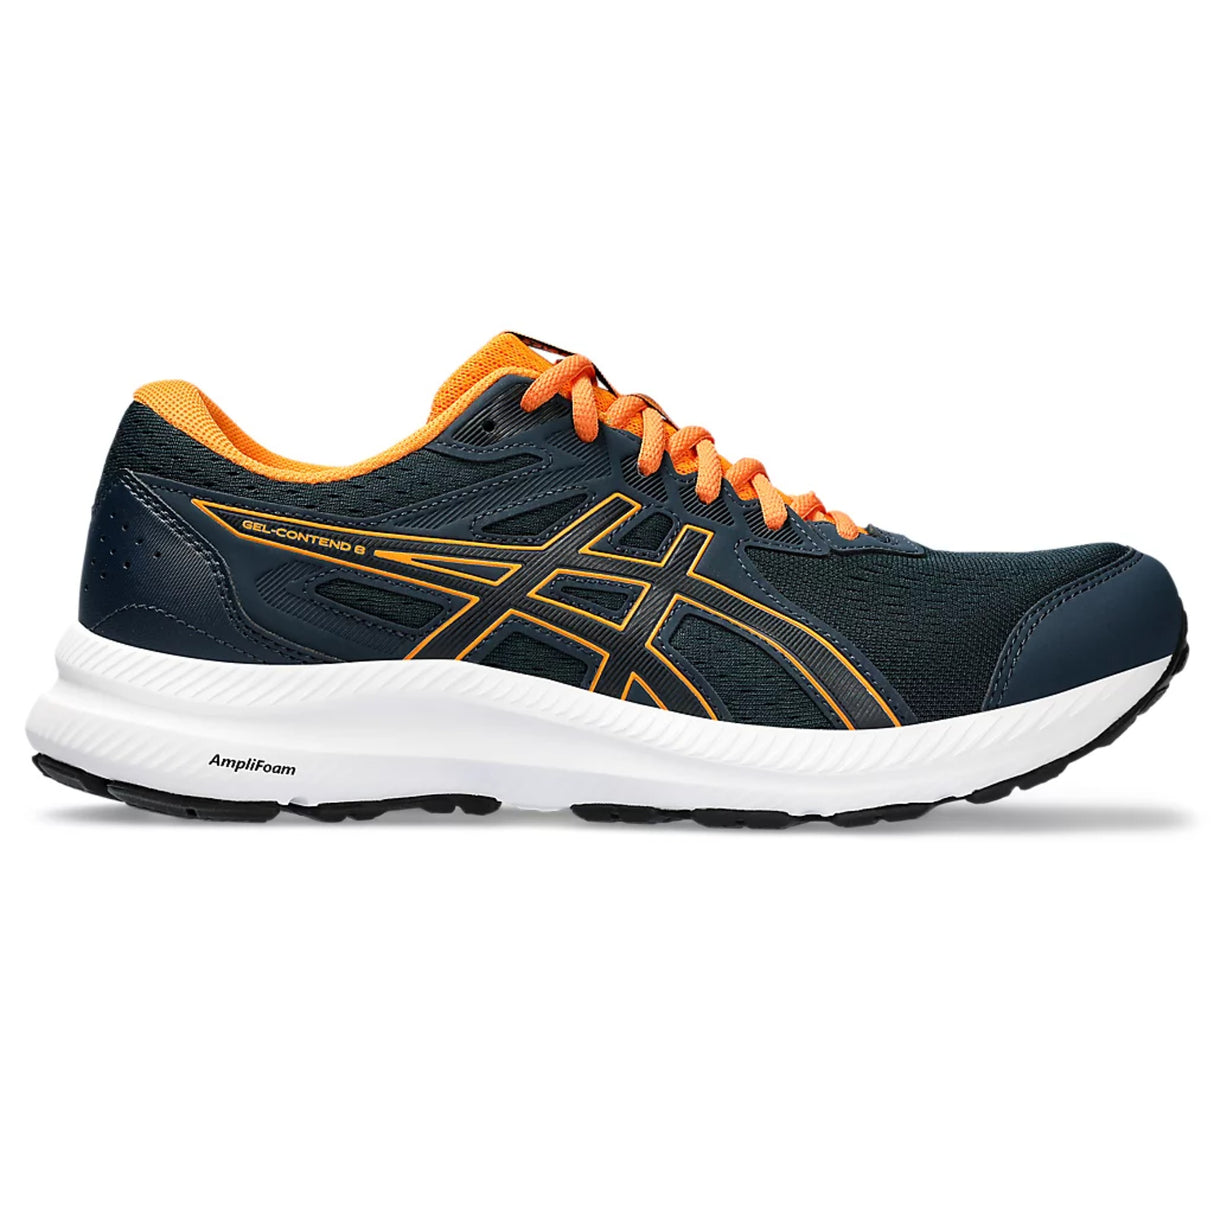 Asics GEL-CONTEND 8 Sports Running Shoes French Blue/Bright Orange 1011B492